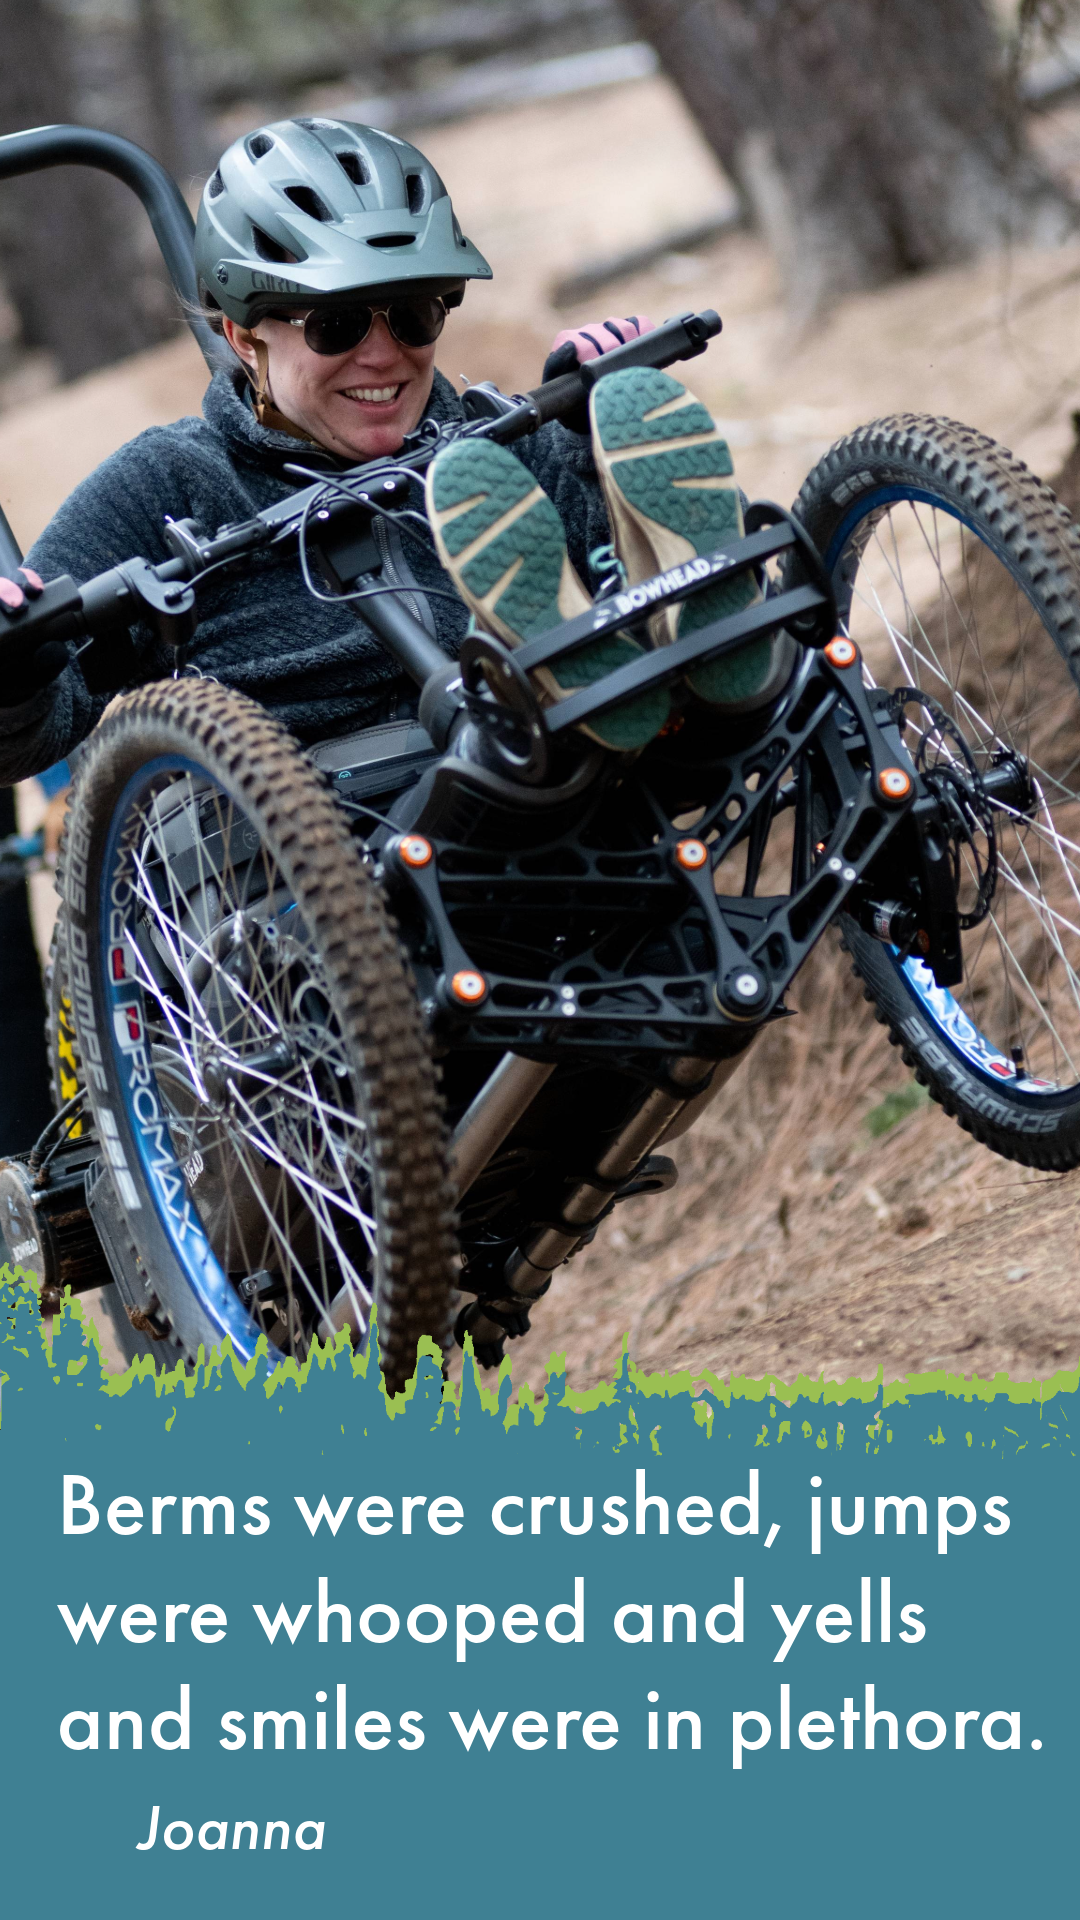 text: Berms were crushed, jumps were whooped and yells and smiles were in plethora. image: Joanna in an electric aMTB handcycle with a big smile comes over a berm on the dirt terrain catching a little air